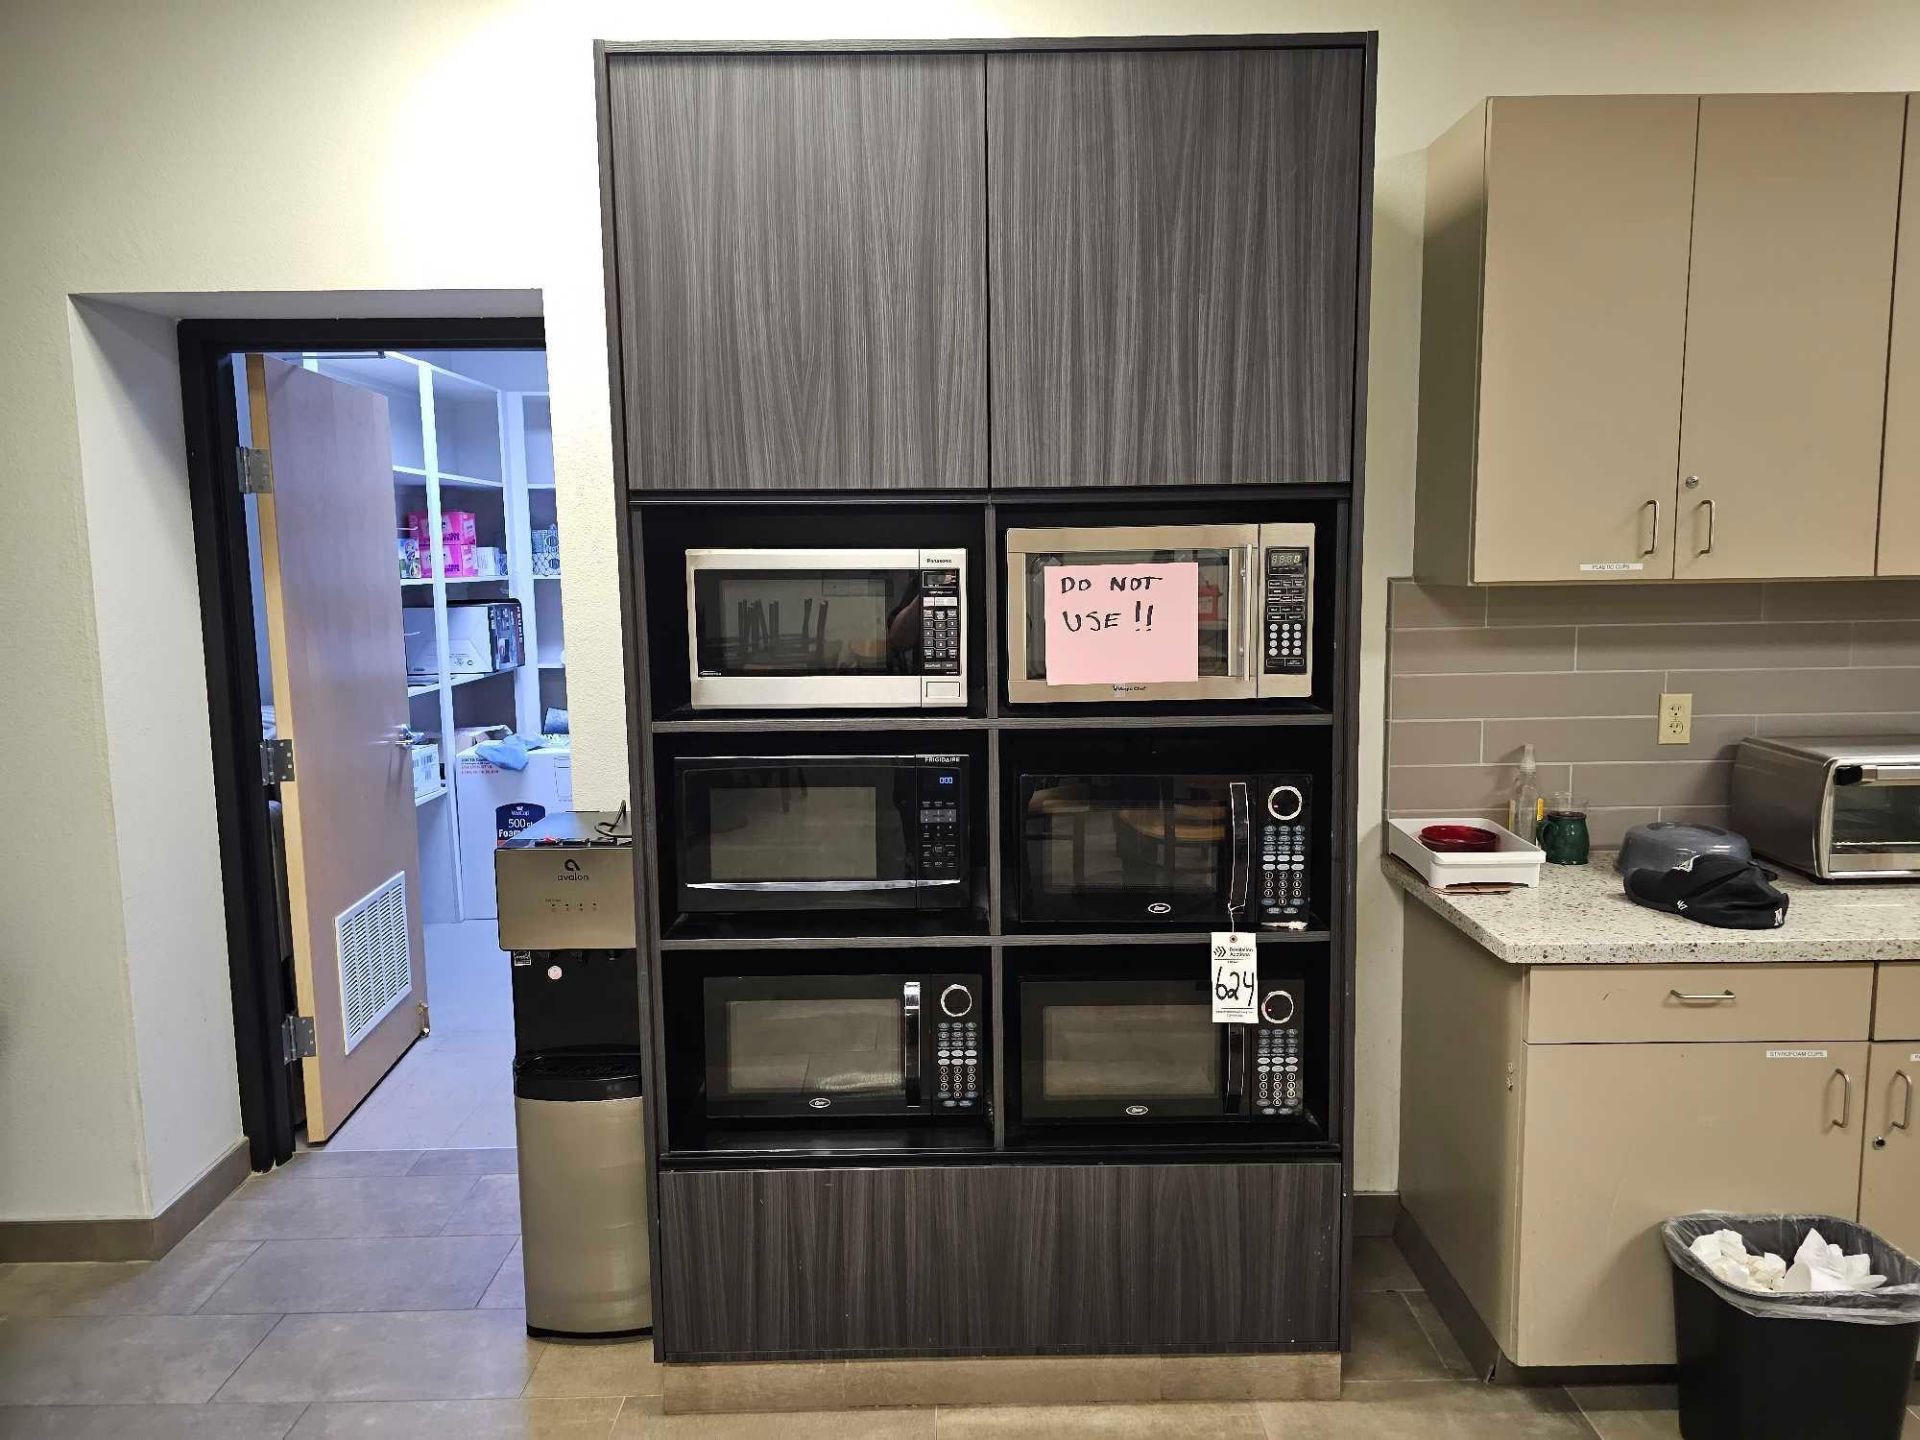 (6) MICROWAVES AND CABINET